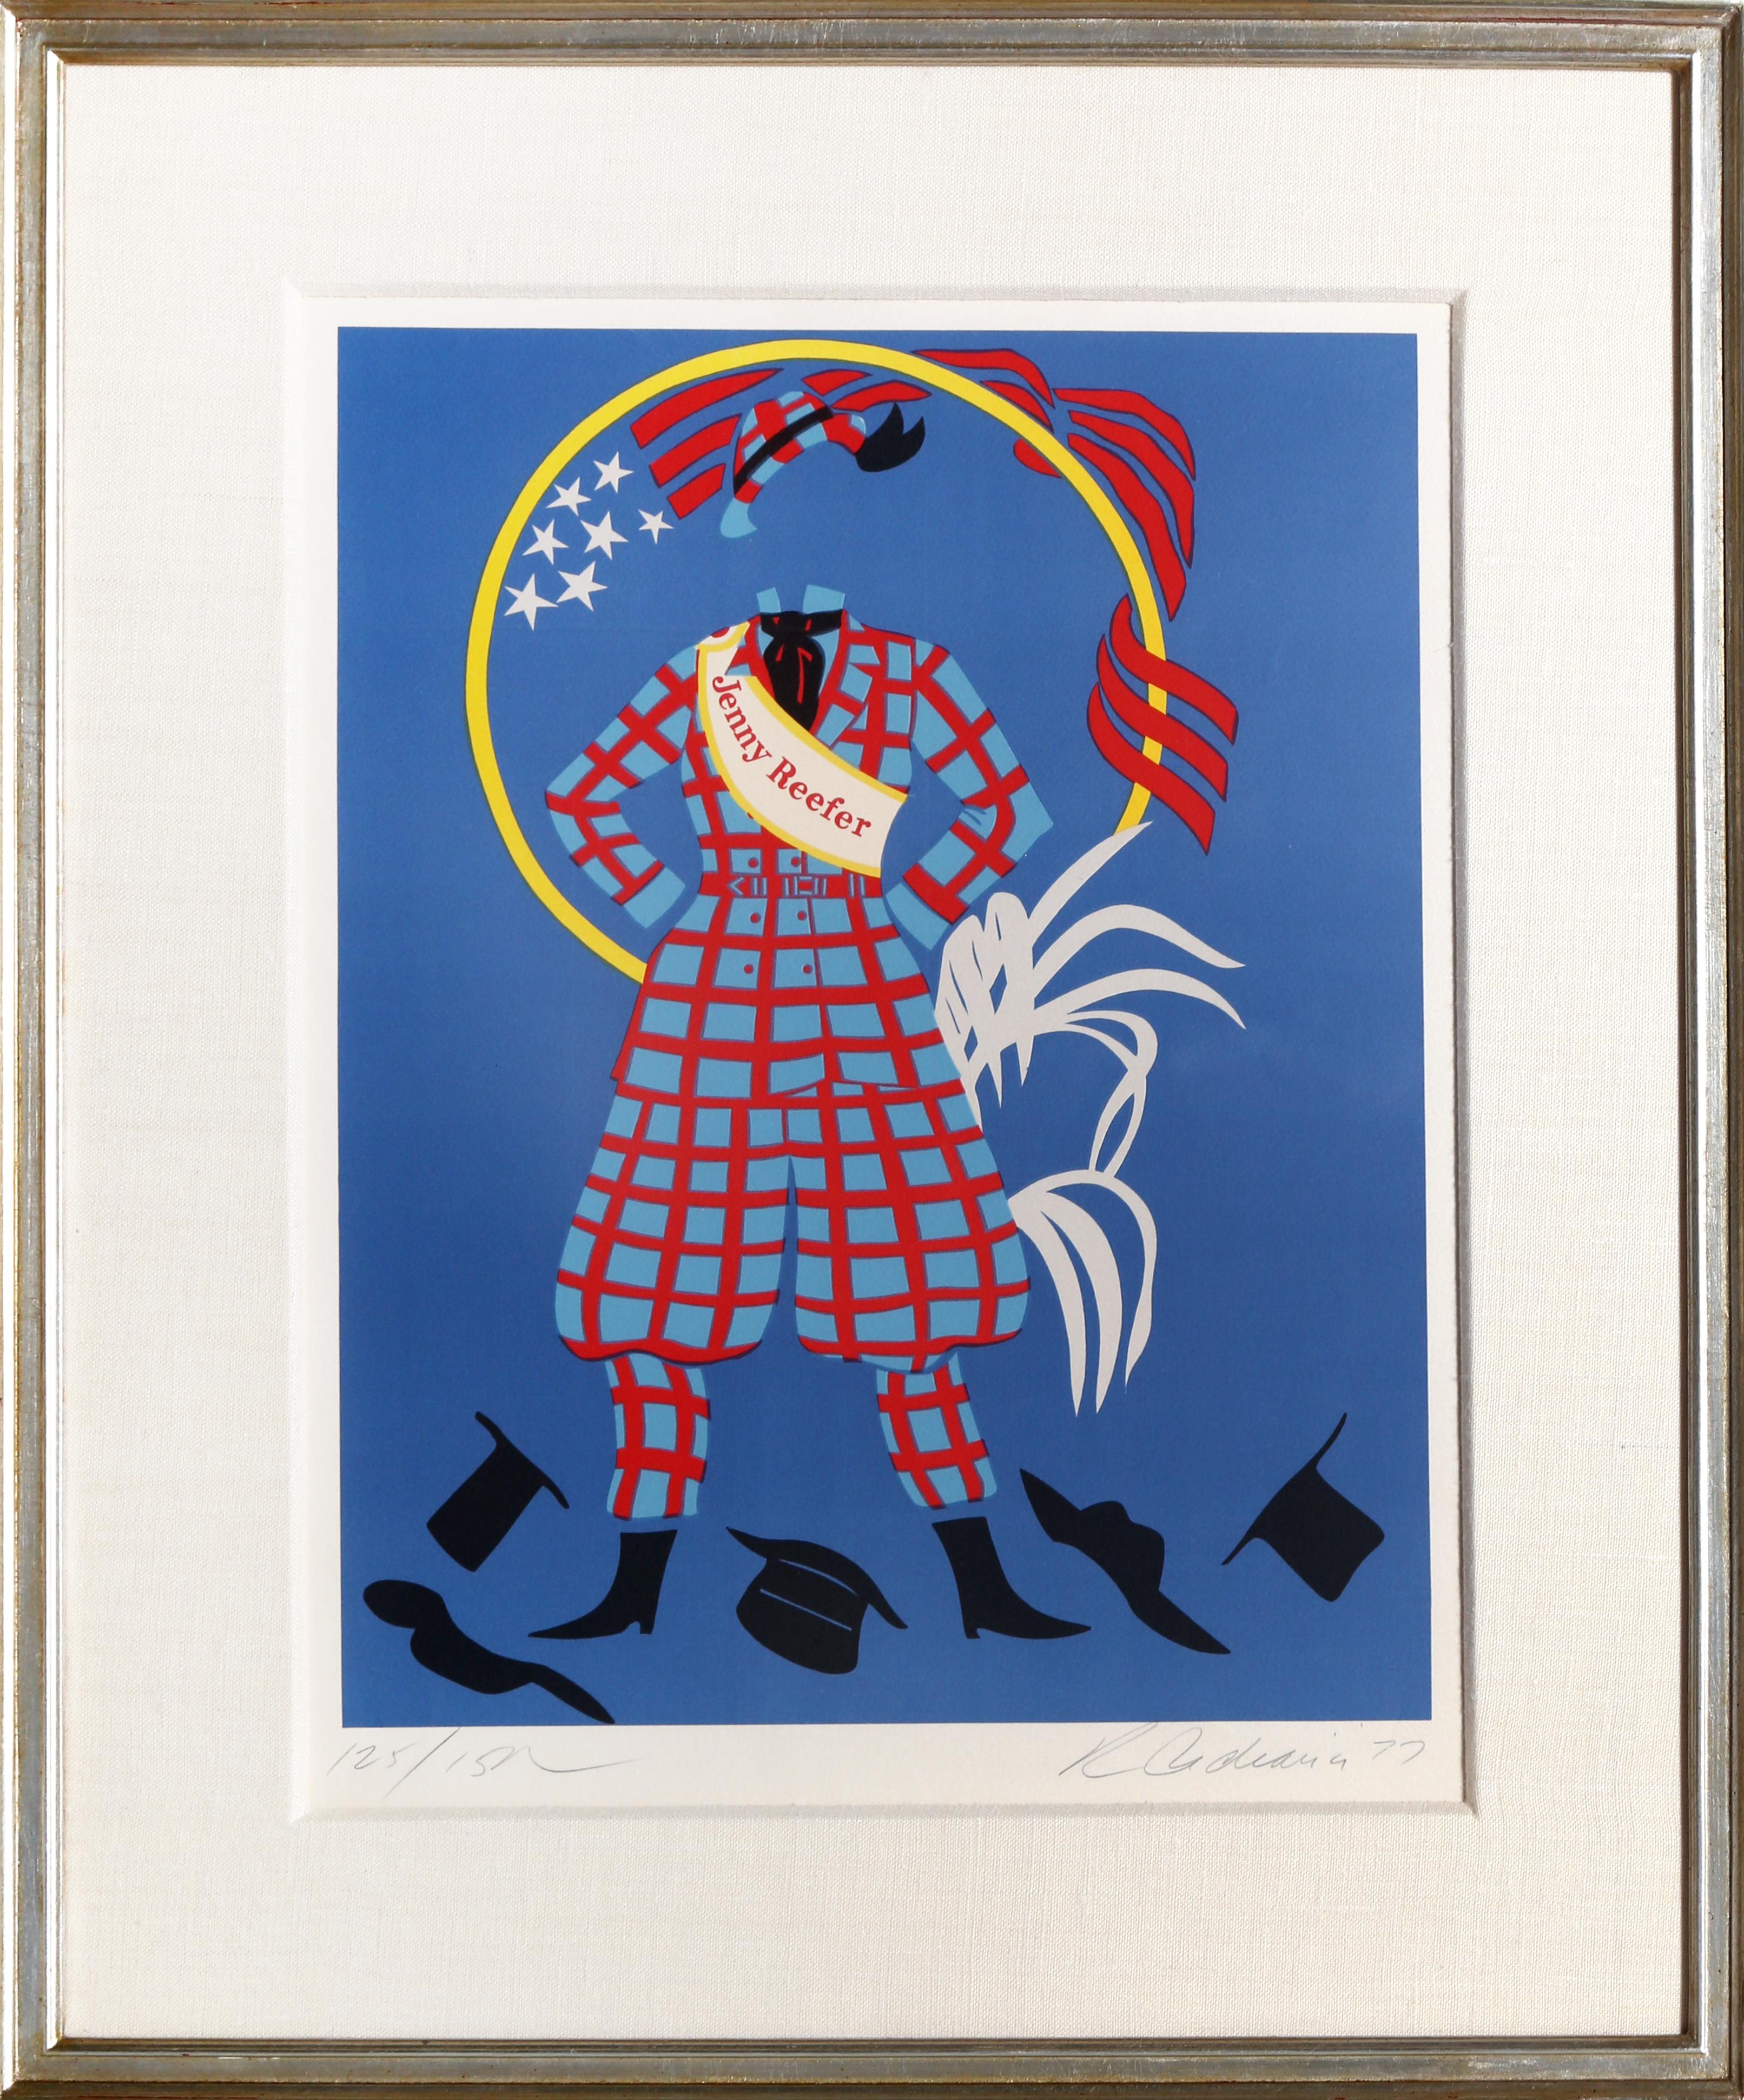 "Jenny Reefer" Lithograph by Robert Indiana